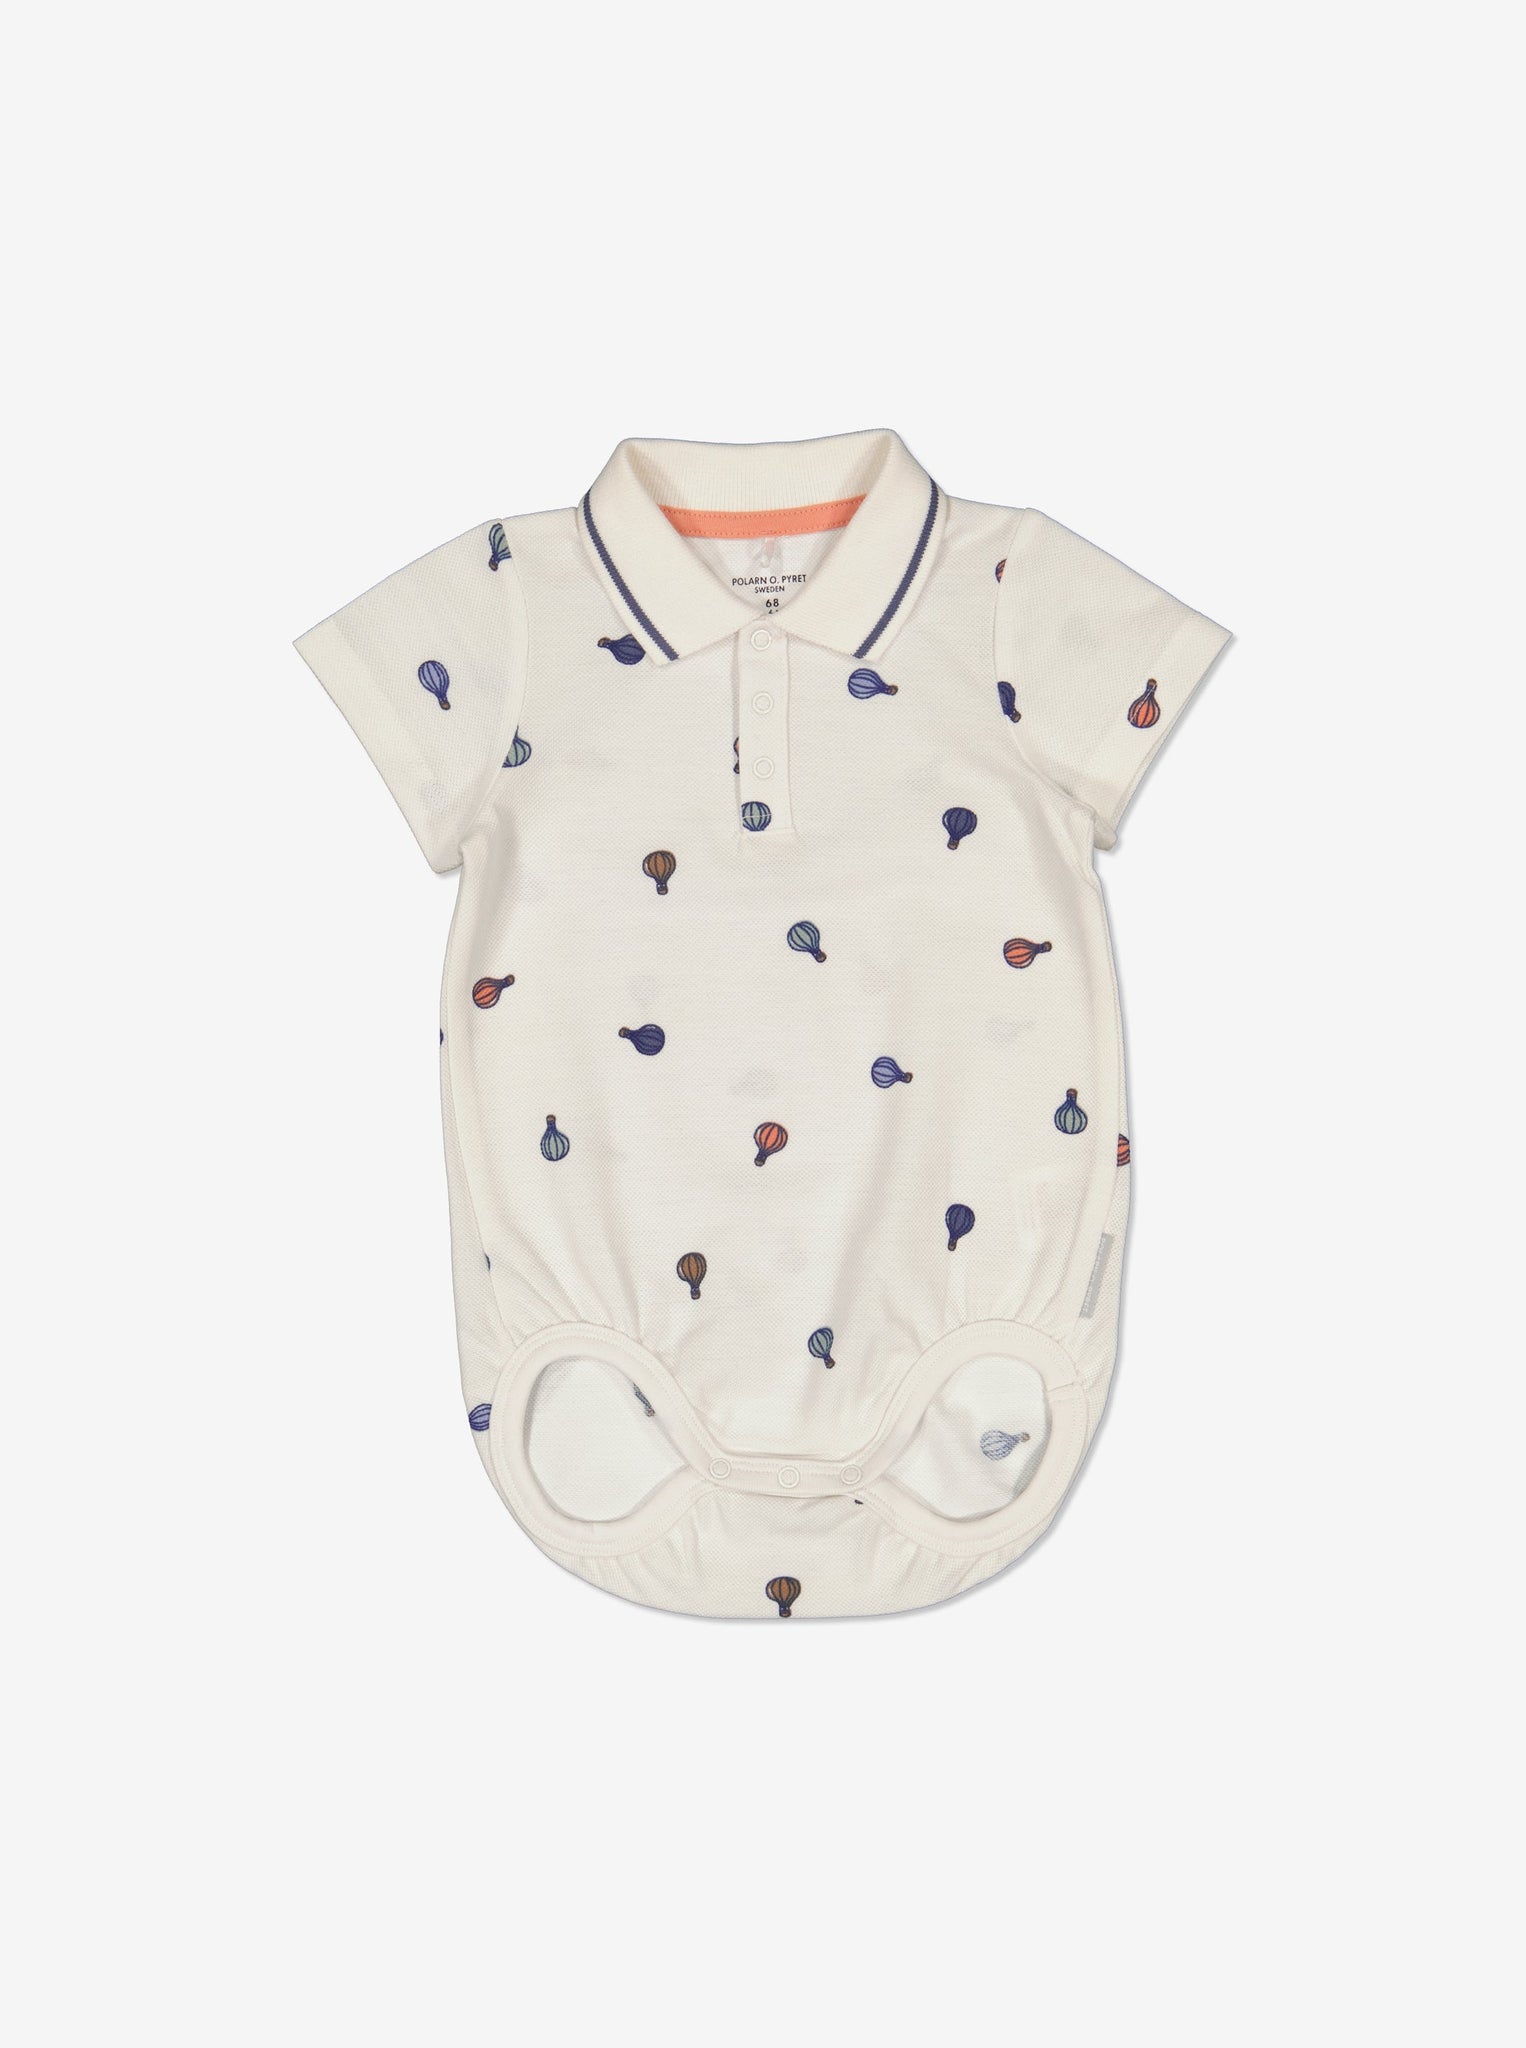 Newborn Baby White Polo Bodysuit from Polarn O. Pyret Kidswear. Made from 100% GOTS Organic Cotton.